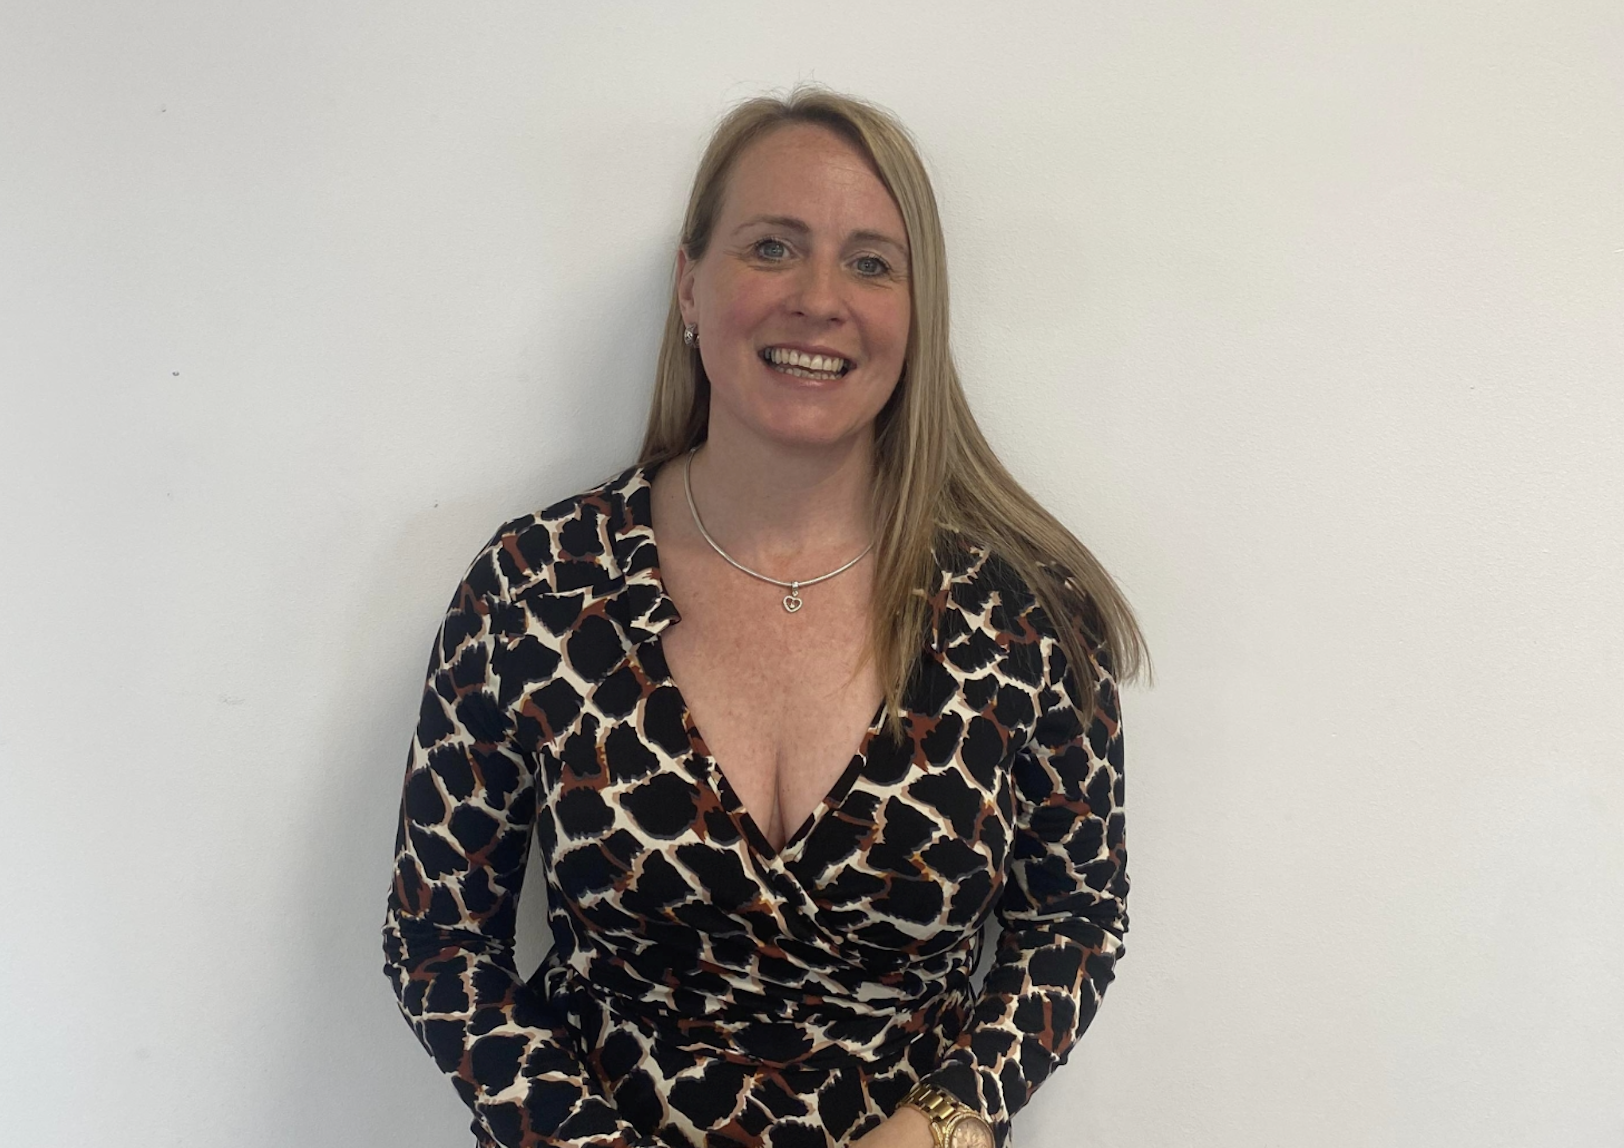 WowNow Hire Appoints Tracey Dunn